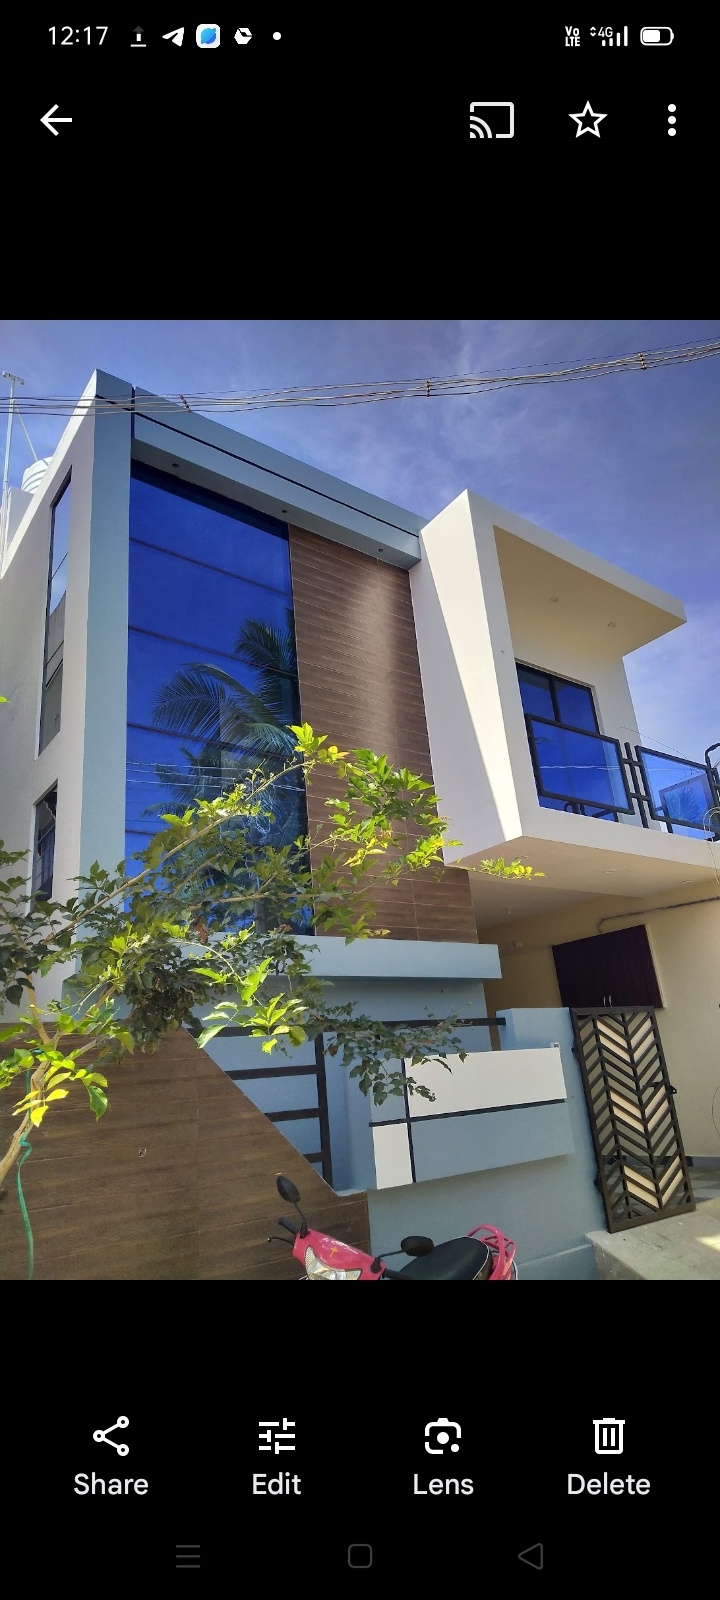 3 Bed/ 3 Bath Sell House/ Bungalow/ Villa; 160 sq. ft. carpet area; 1,100 sq. ft. lot for sale @Moolakulam 